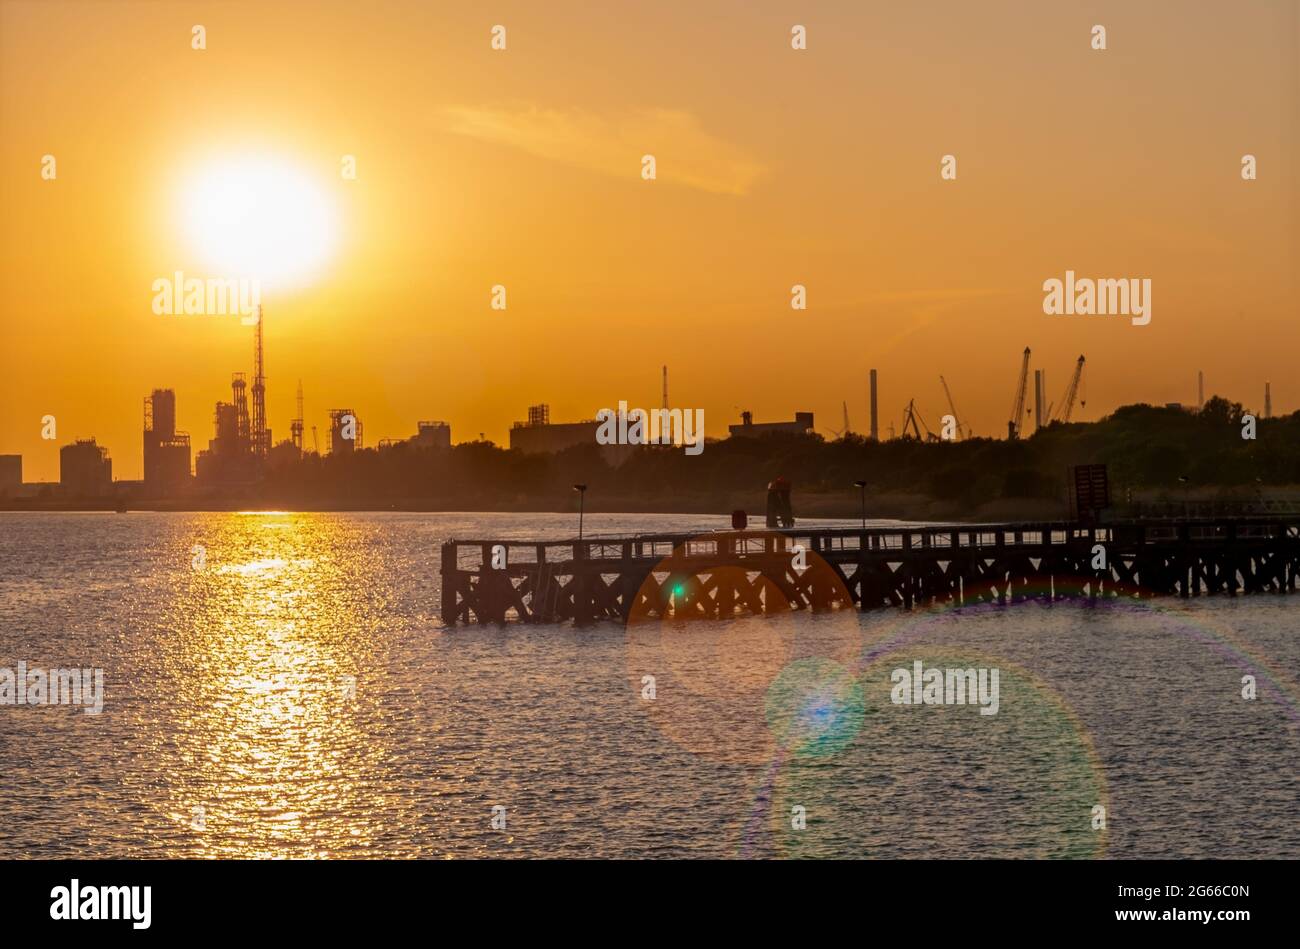 Old wooden pier in front of port silhouettes in Antwerp. Stock Photo